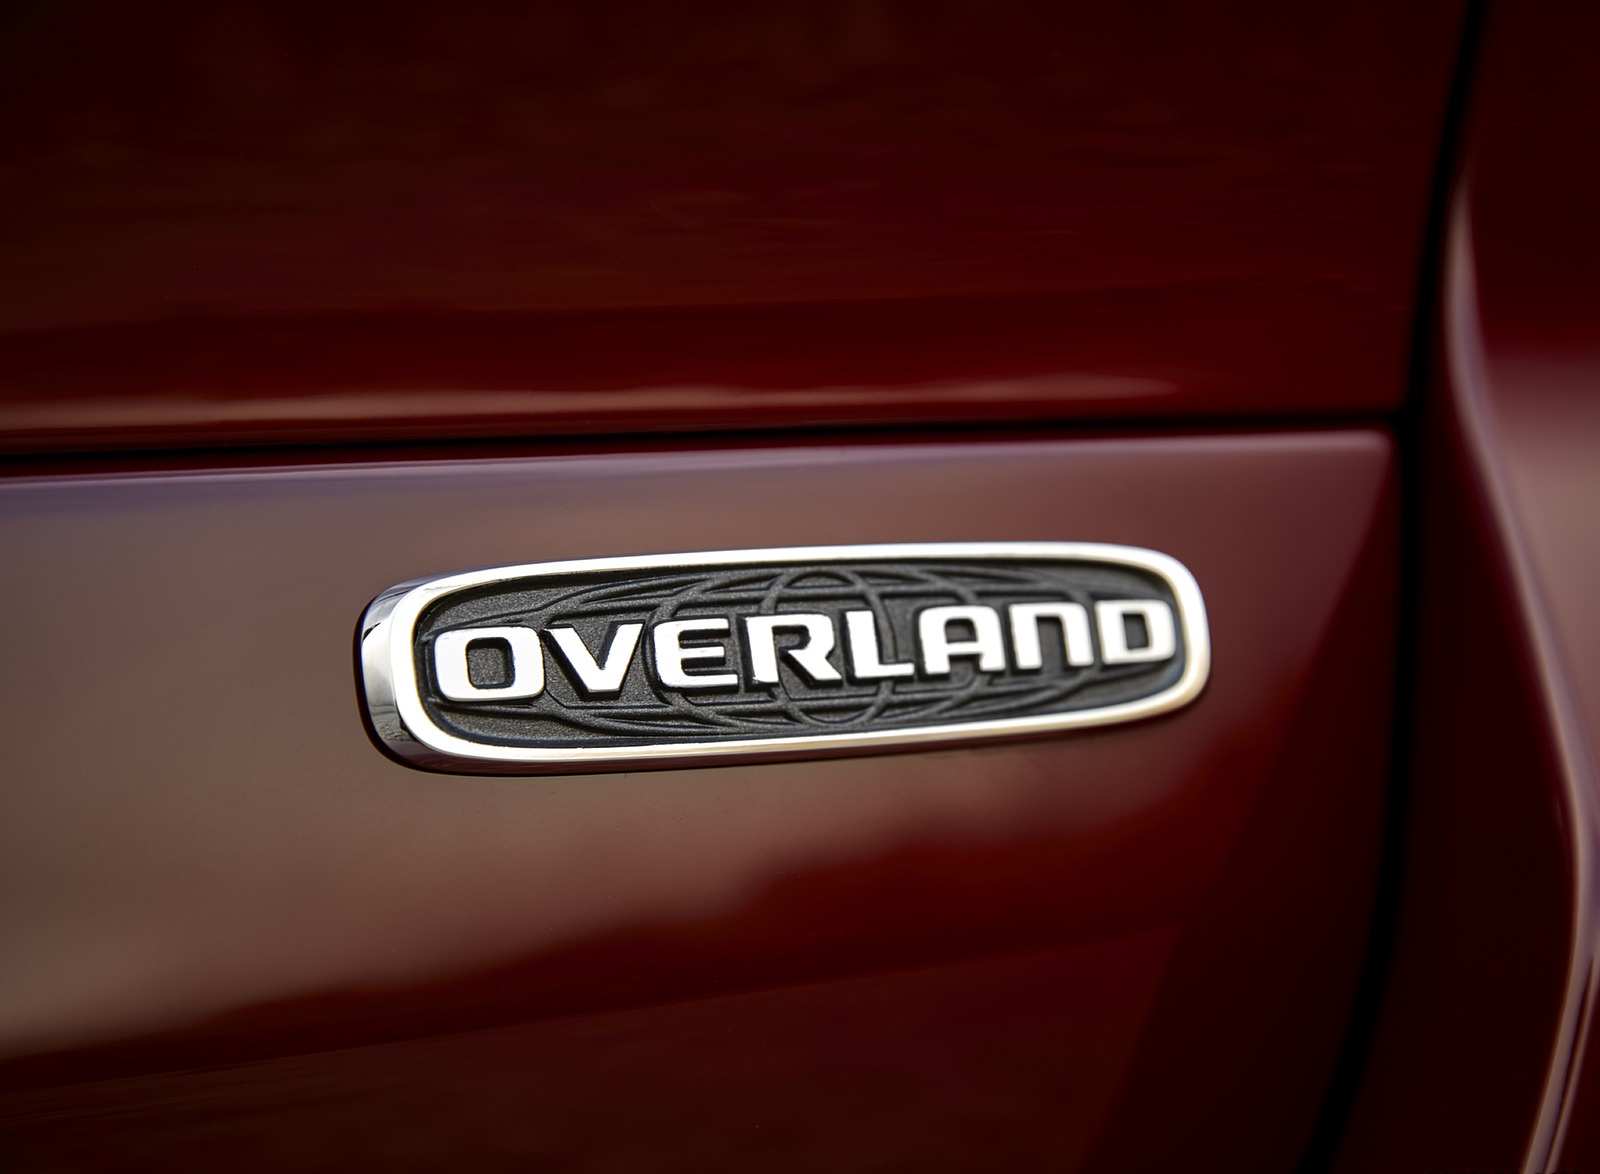 2021 Jeep Grand Cherokee L Overland Badge Wallpapers #30 of 51